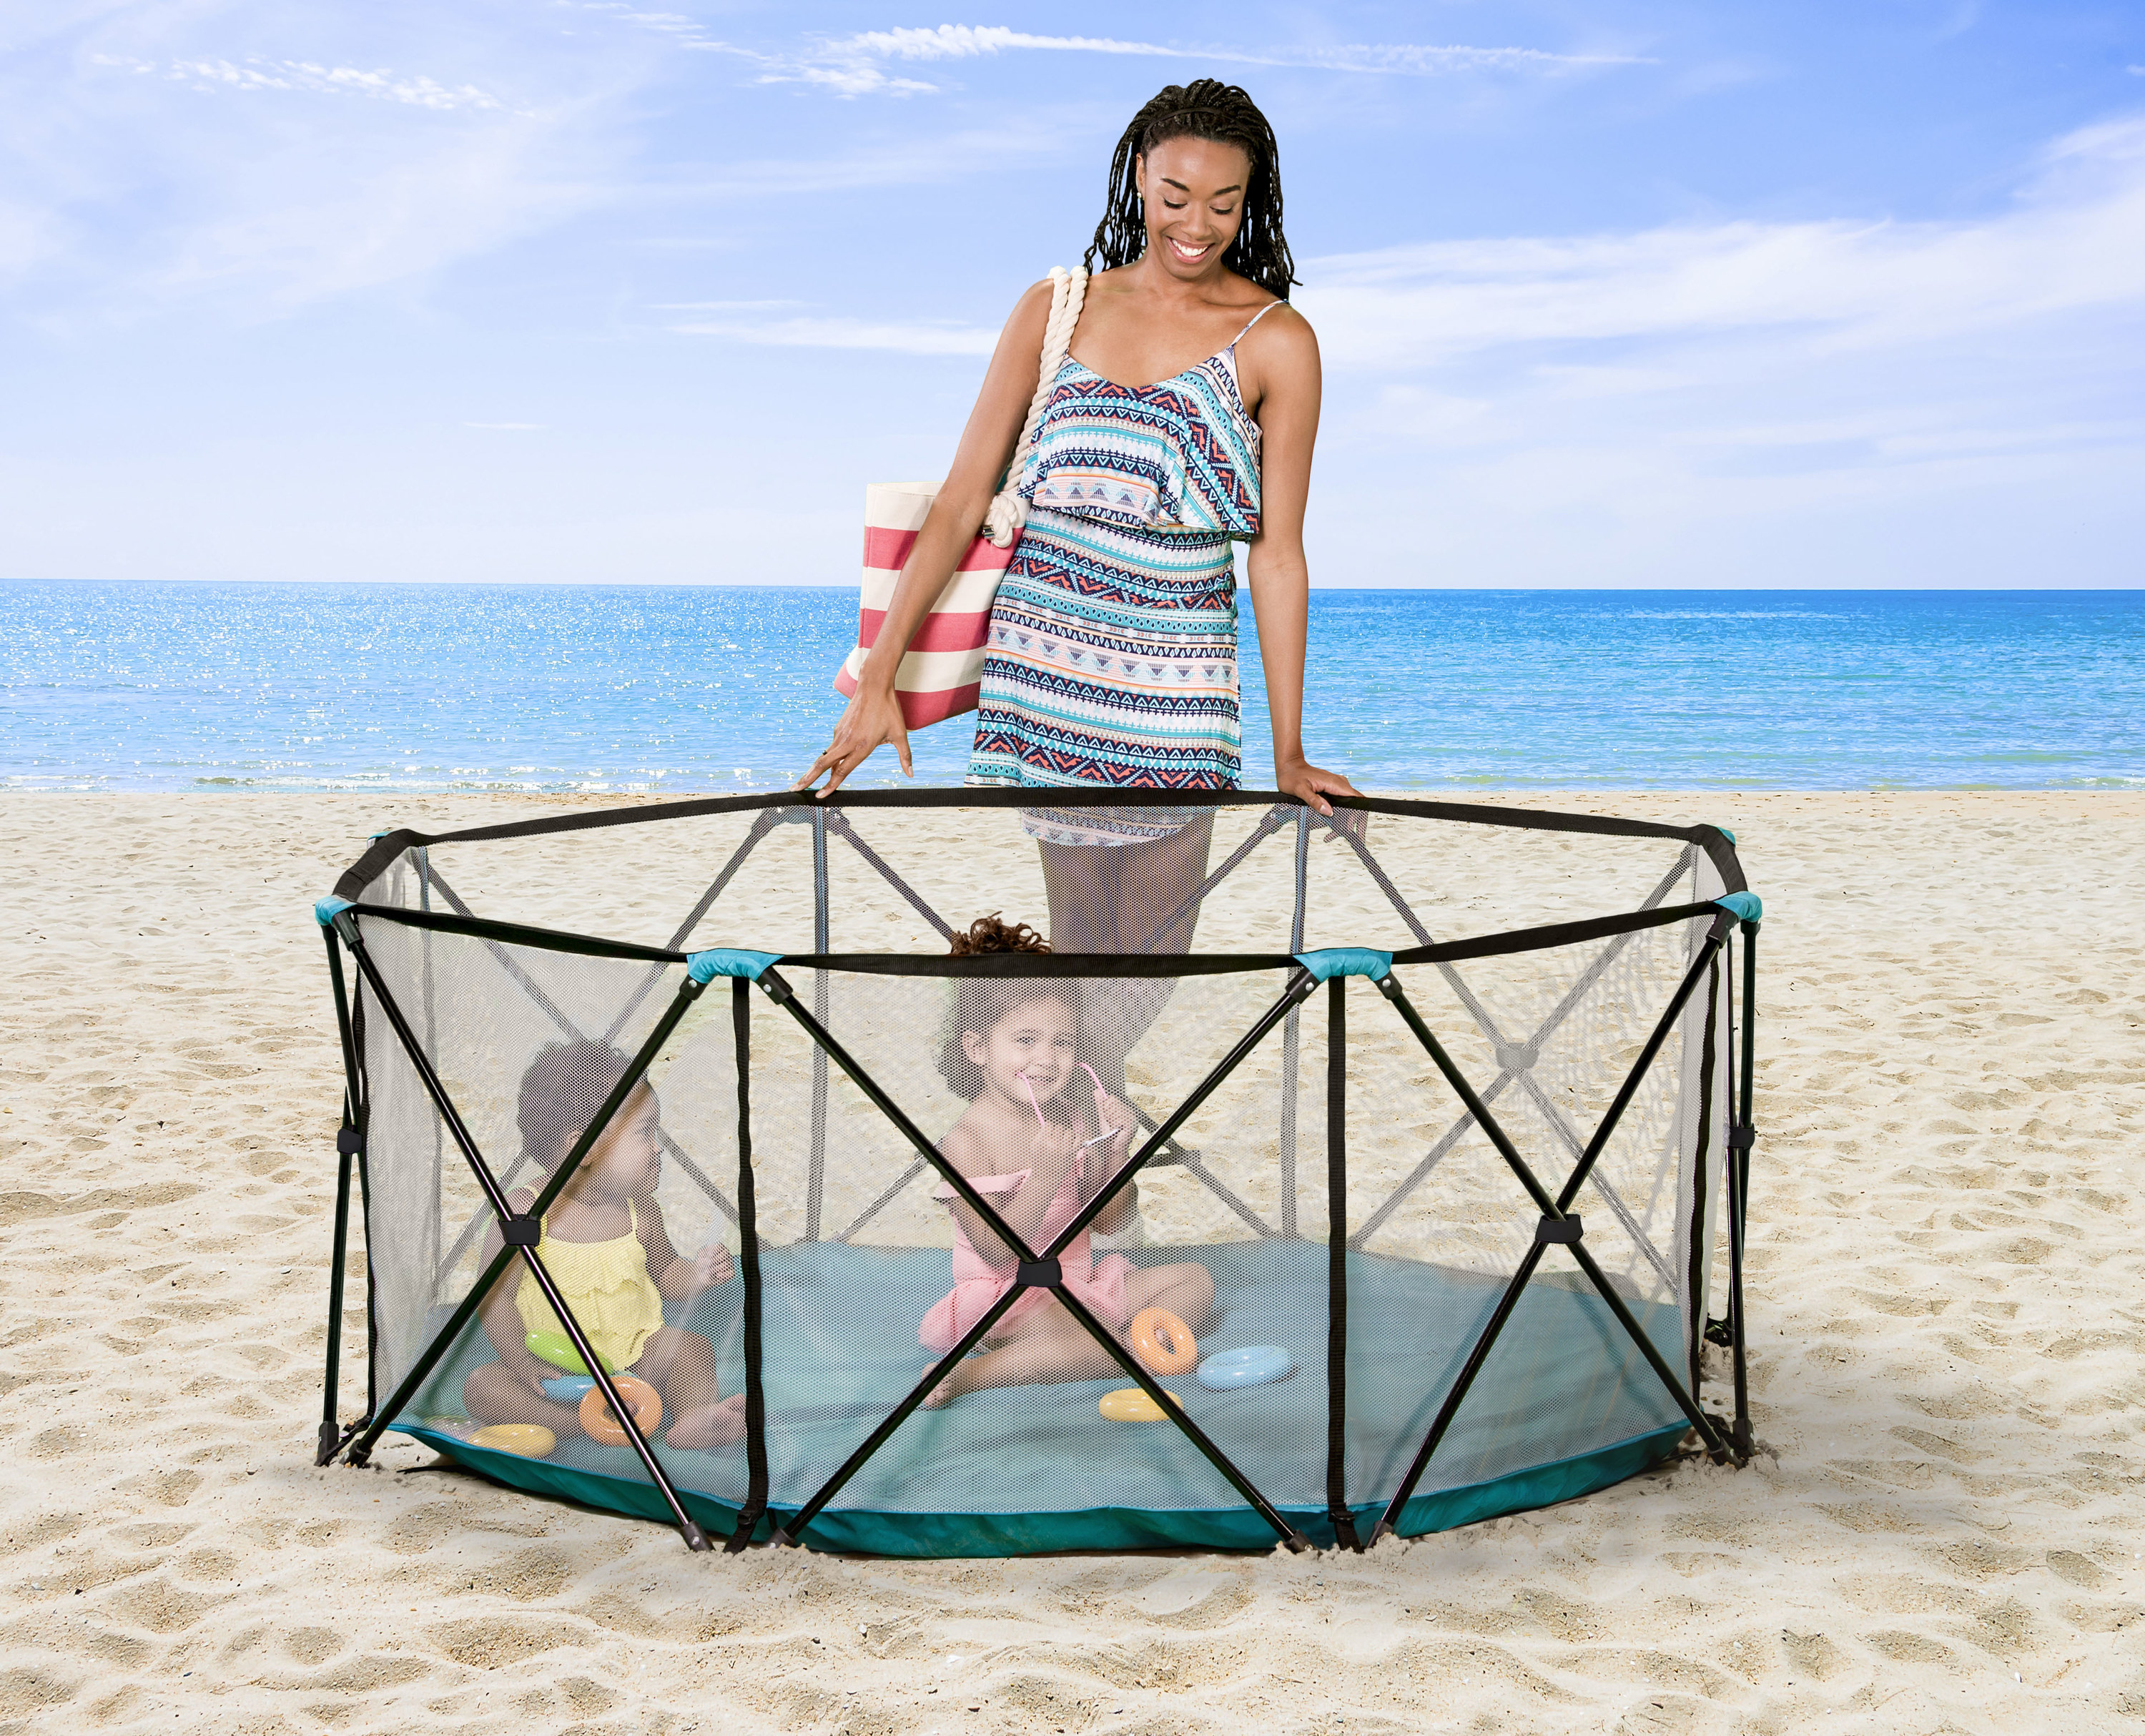 Model looking over two children in a black and teal see-through play pen